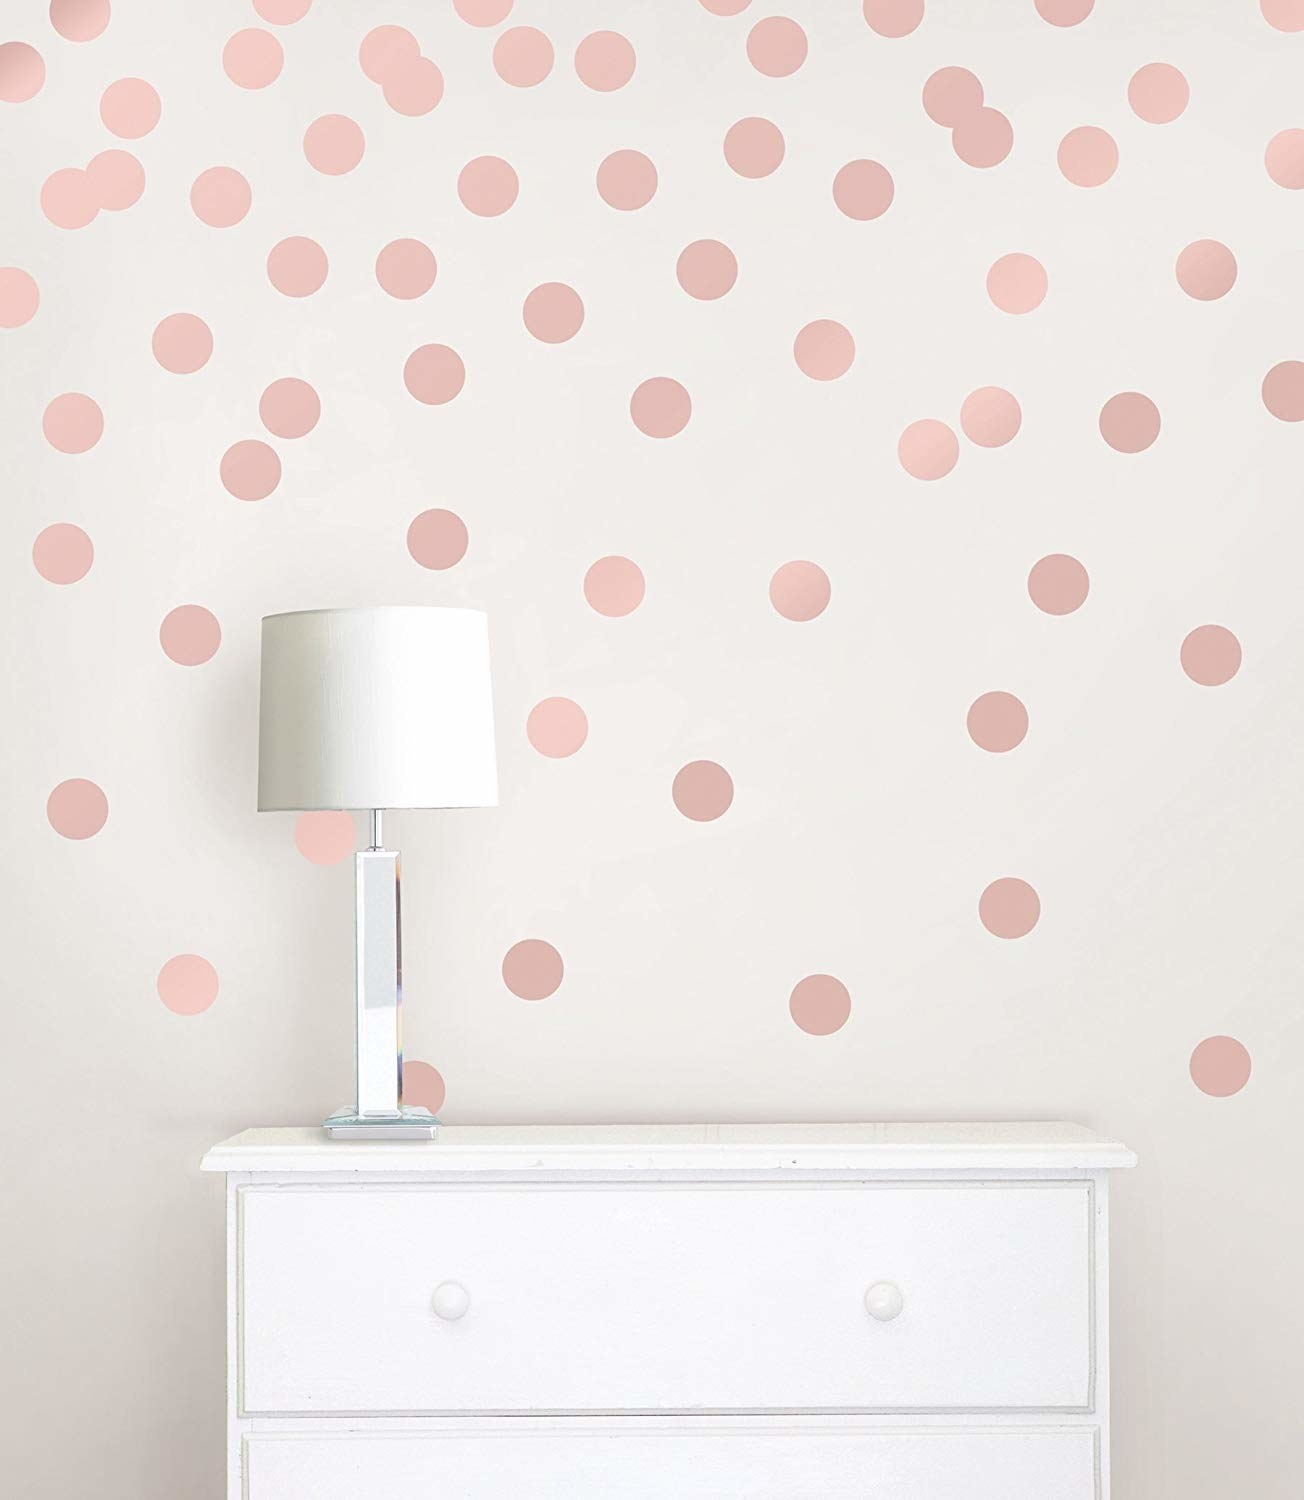 Circular wall decals are stuck on a wall with a set of drawers and a lamp